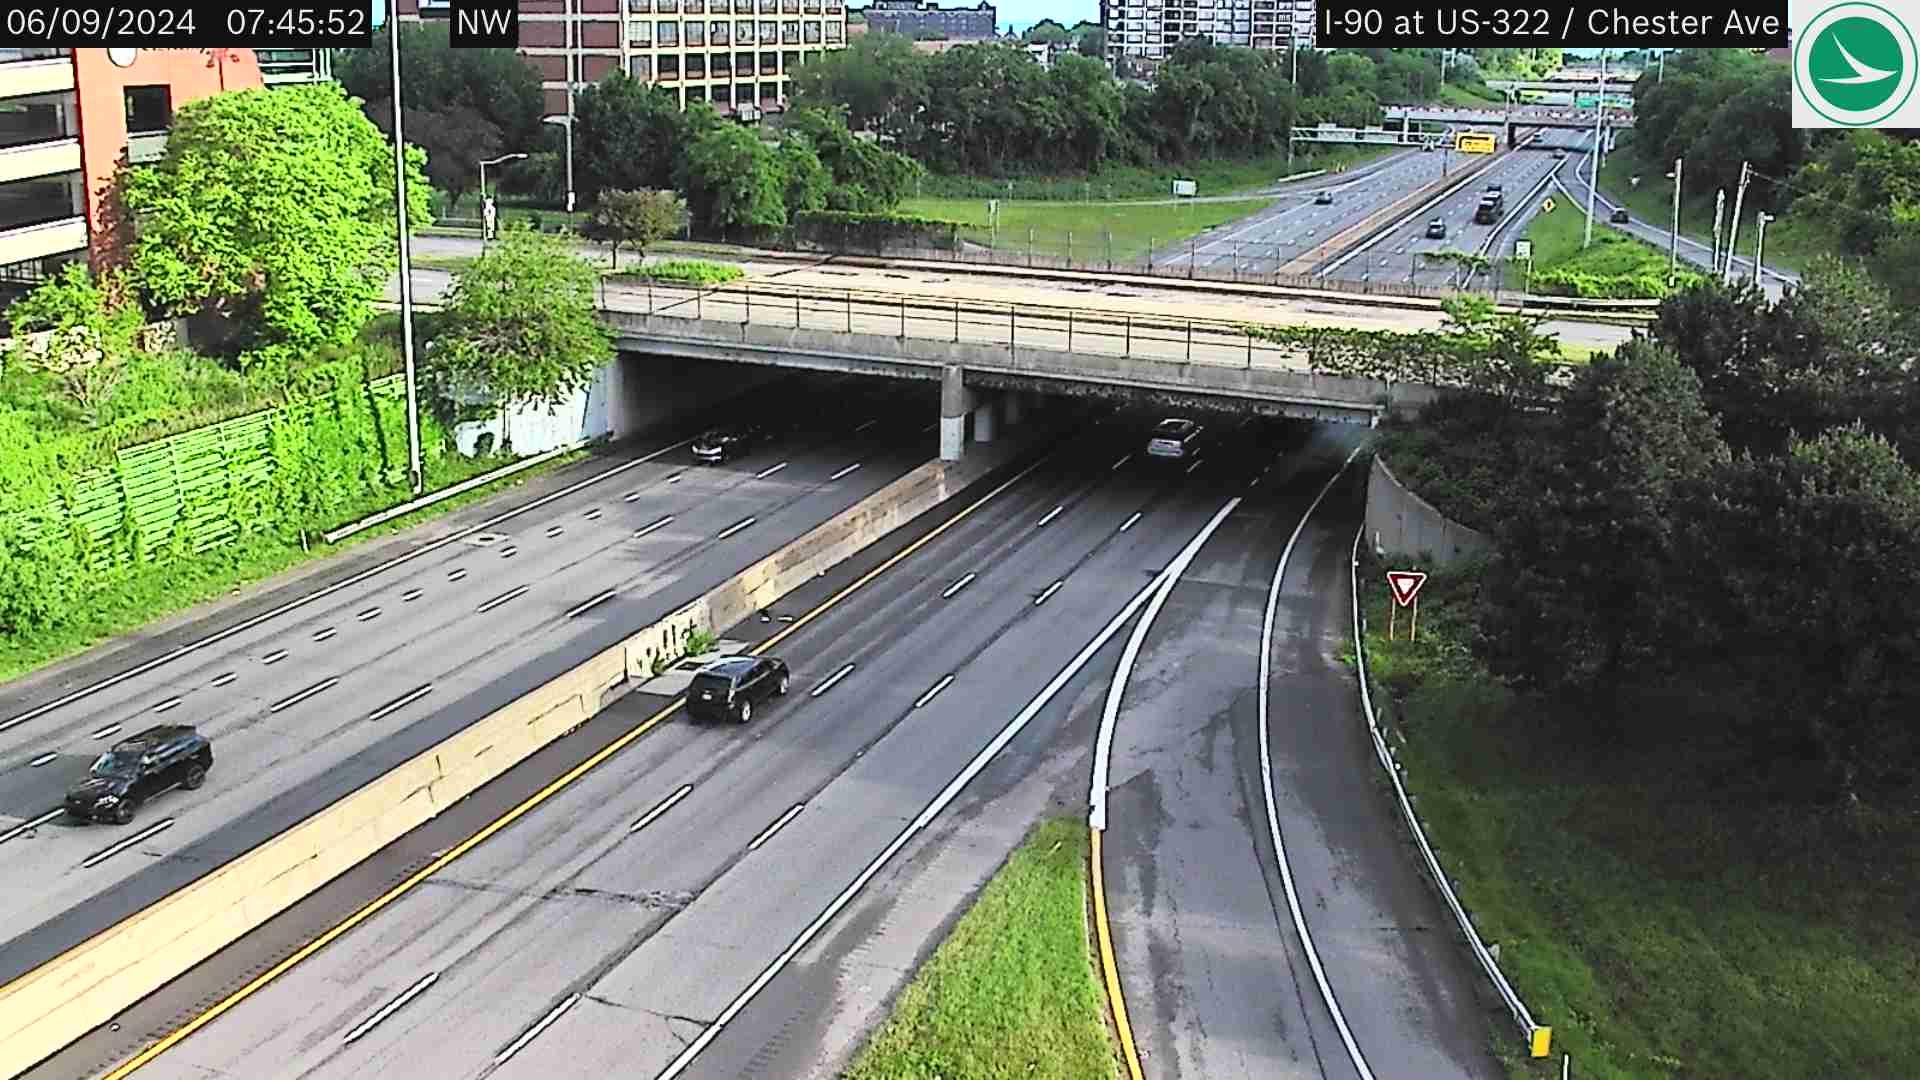 Traffic Cam Asiatown: I-90 at US-322 - Chester Ave